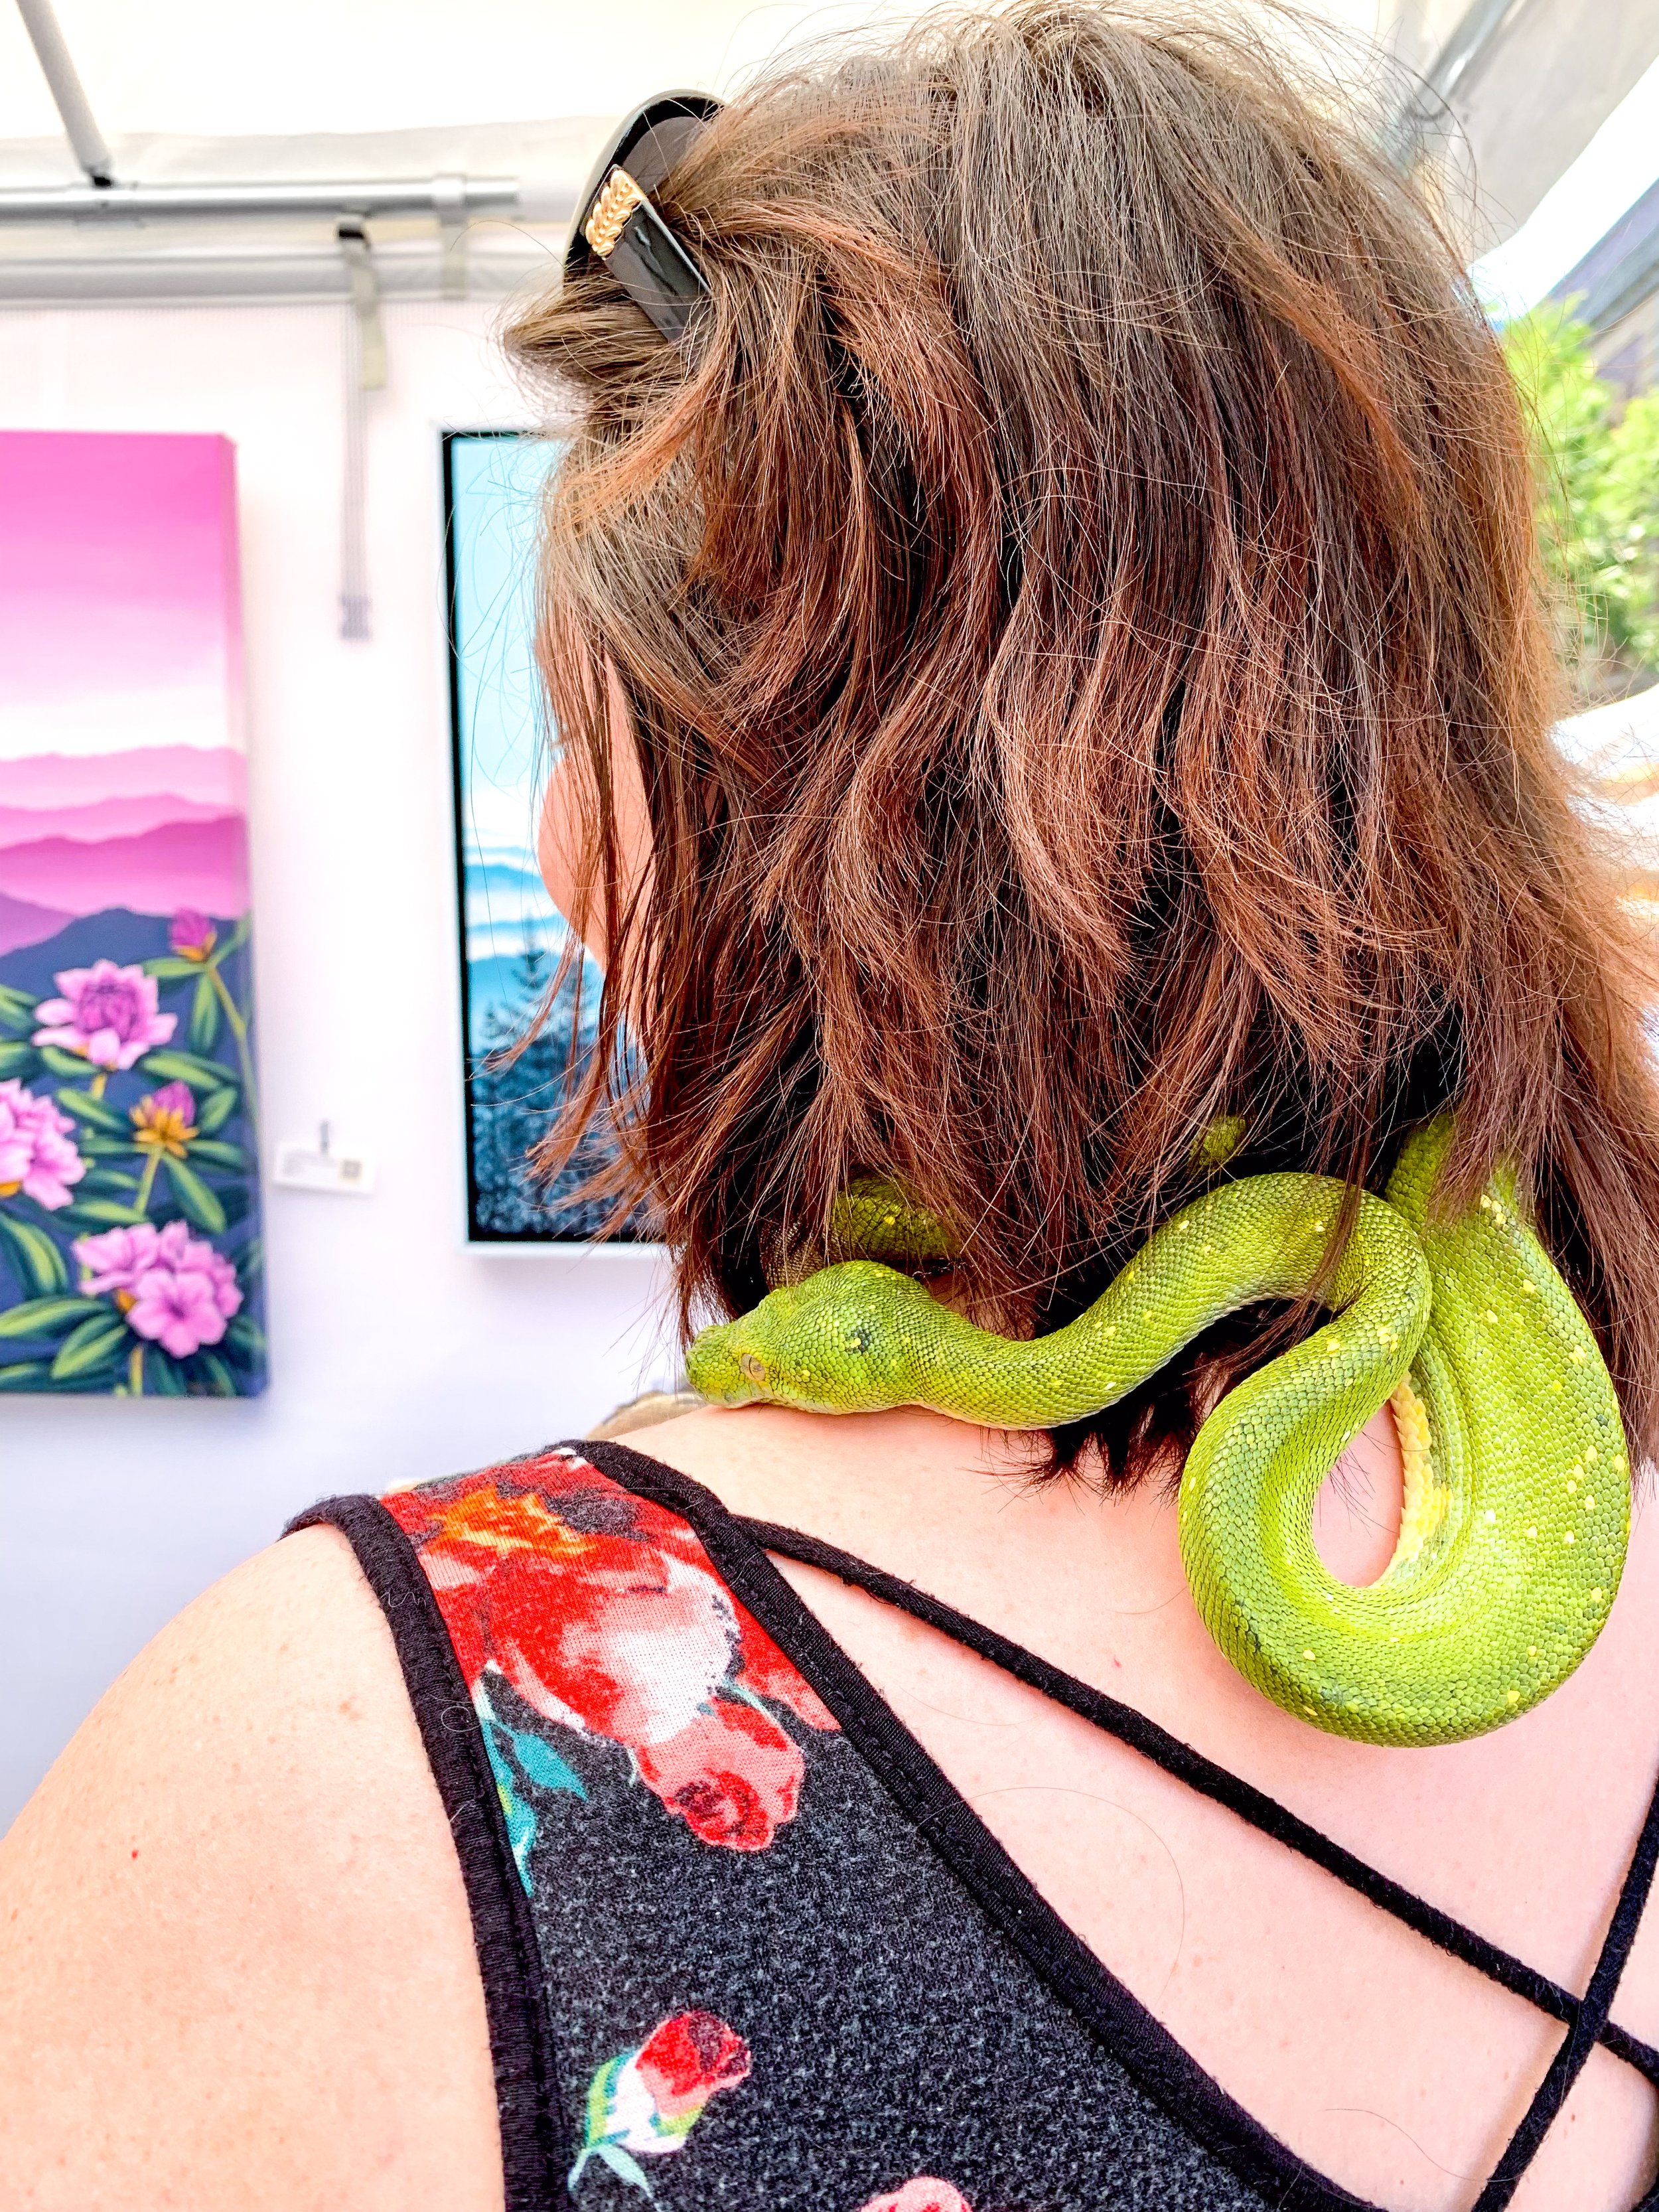 A little Emerald Tree Boa joins in on the fun